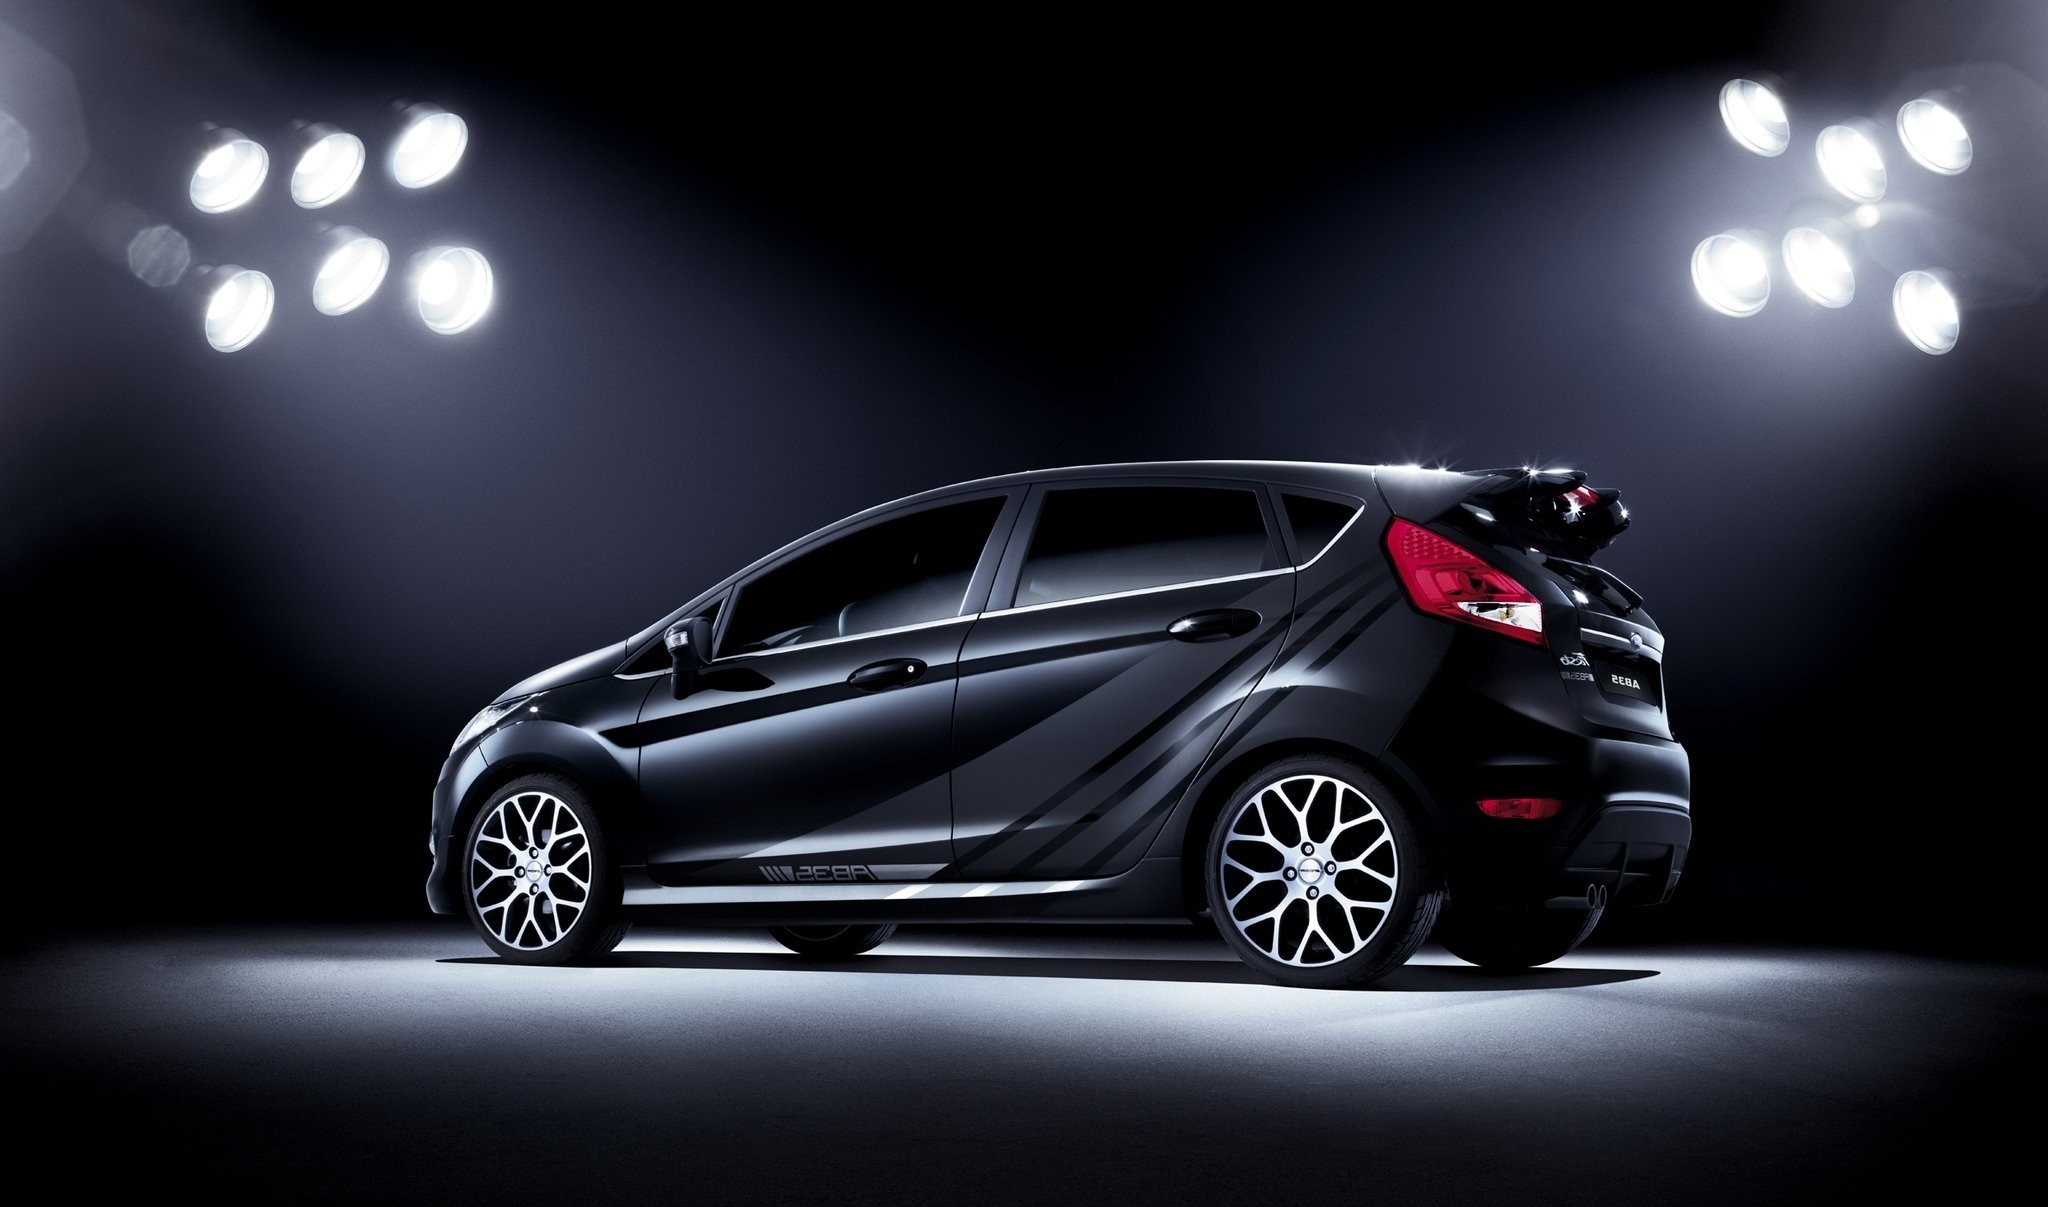 Ford Fiesta Hdq Cover Wallpapers Photos 2048x1207